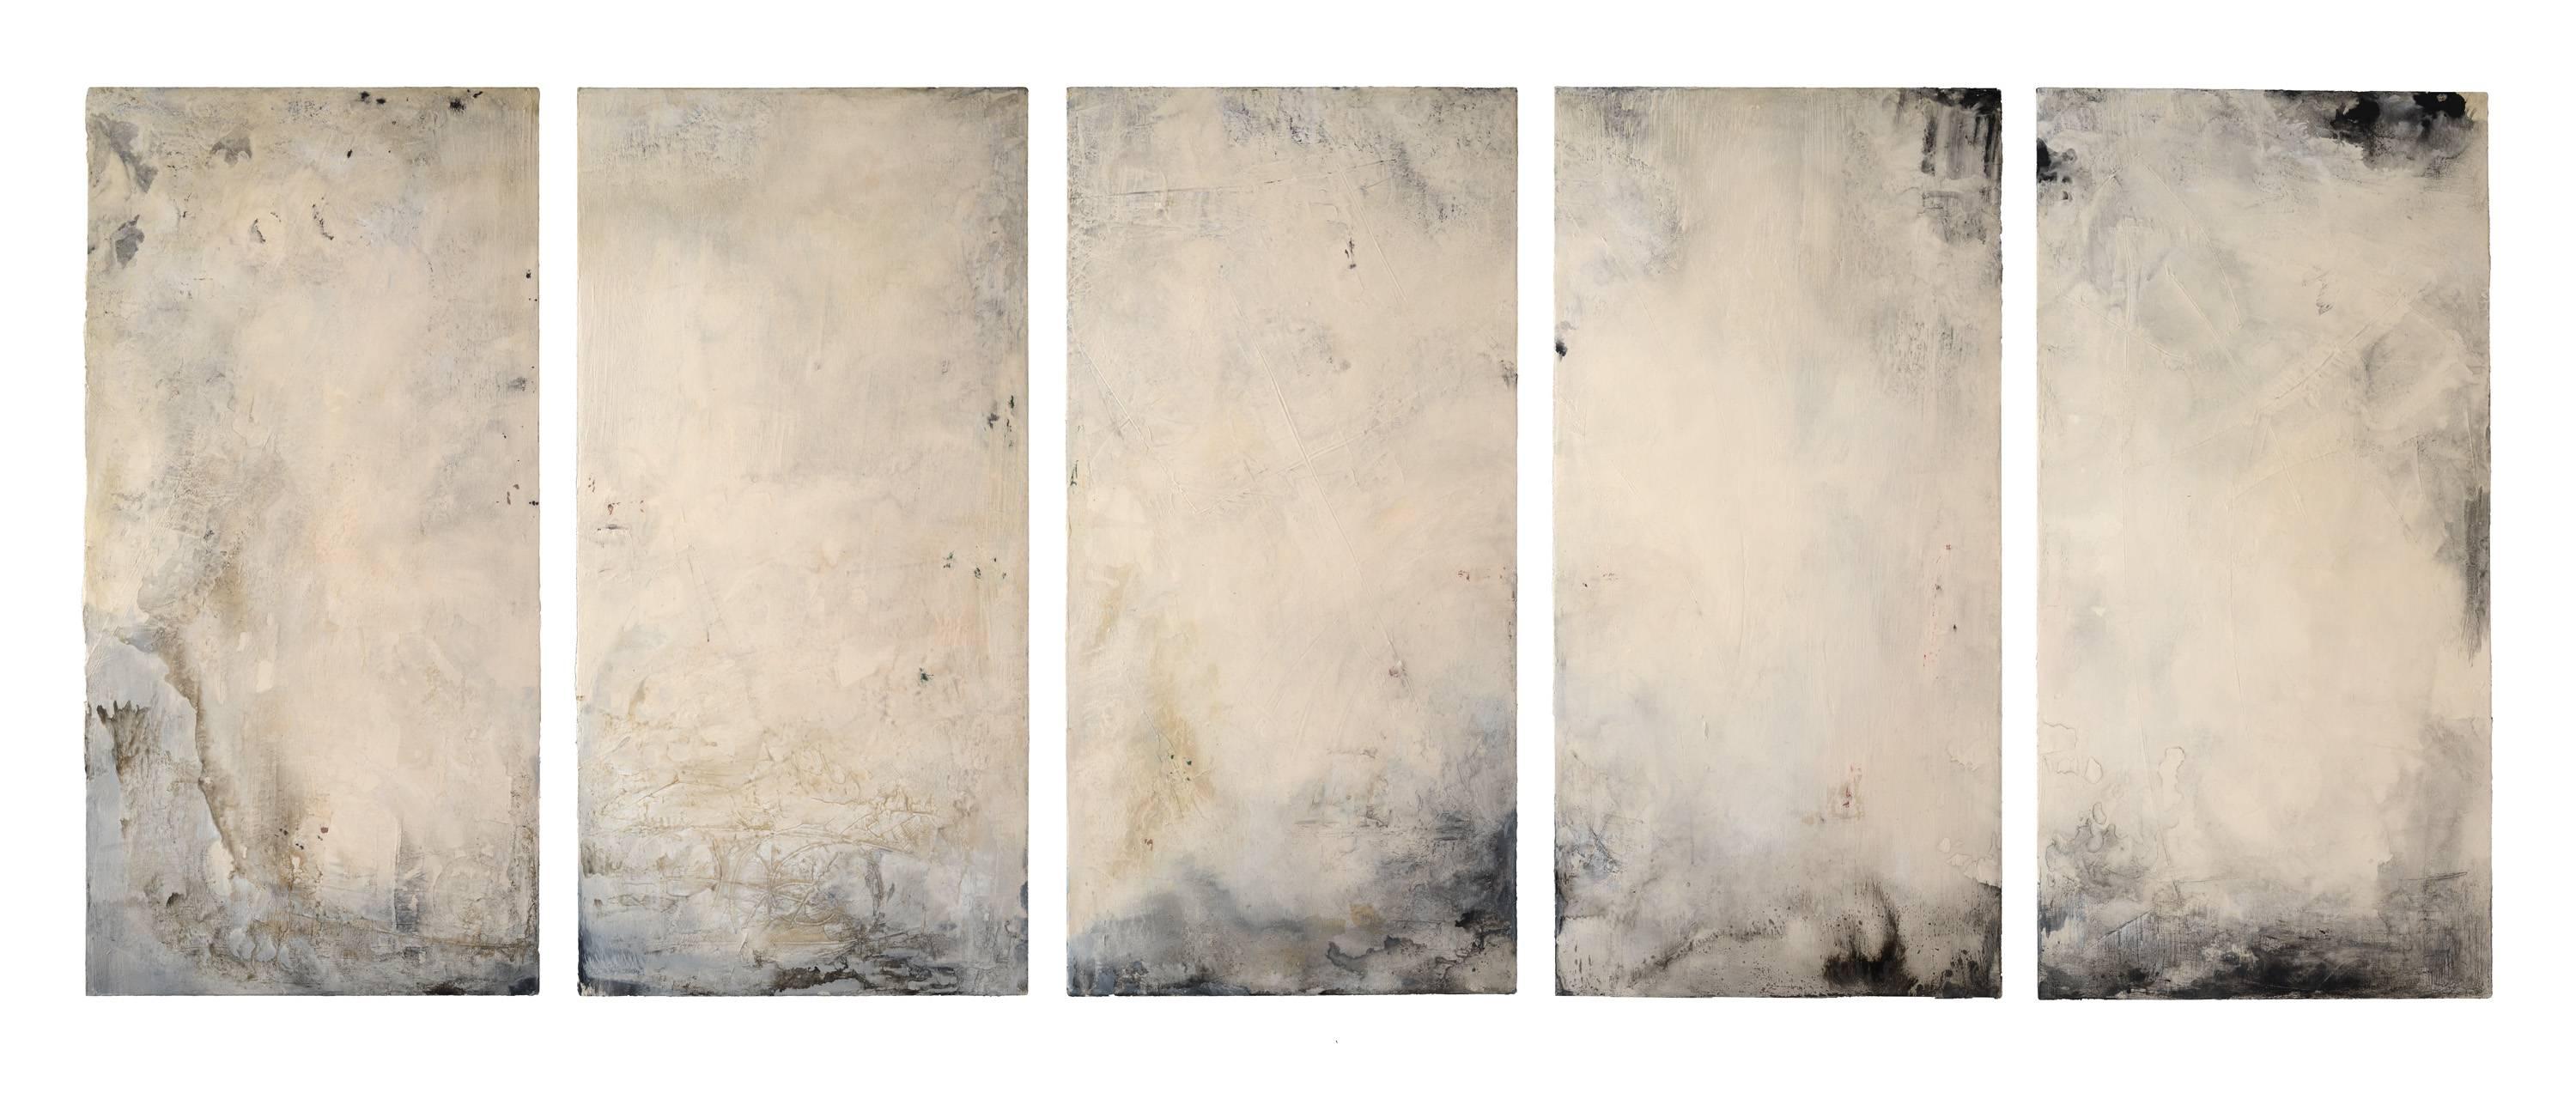 A five paneled painting from Margot Nimiroski's &quot;Shoji Series&quot;. 48&quot; x 24&quot; each, 48&quot; x 11' installed. Acrylic on panel. 

Originally known for her large collages of cardboard, Margot Nimiroski has since gained a reputation